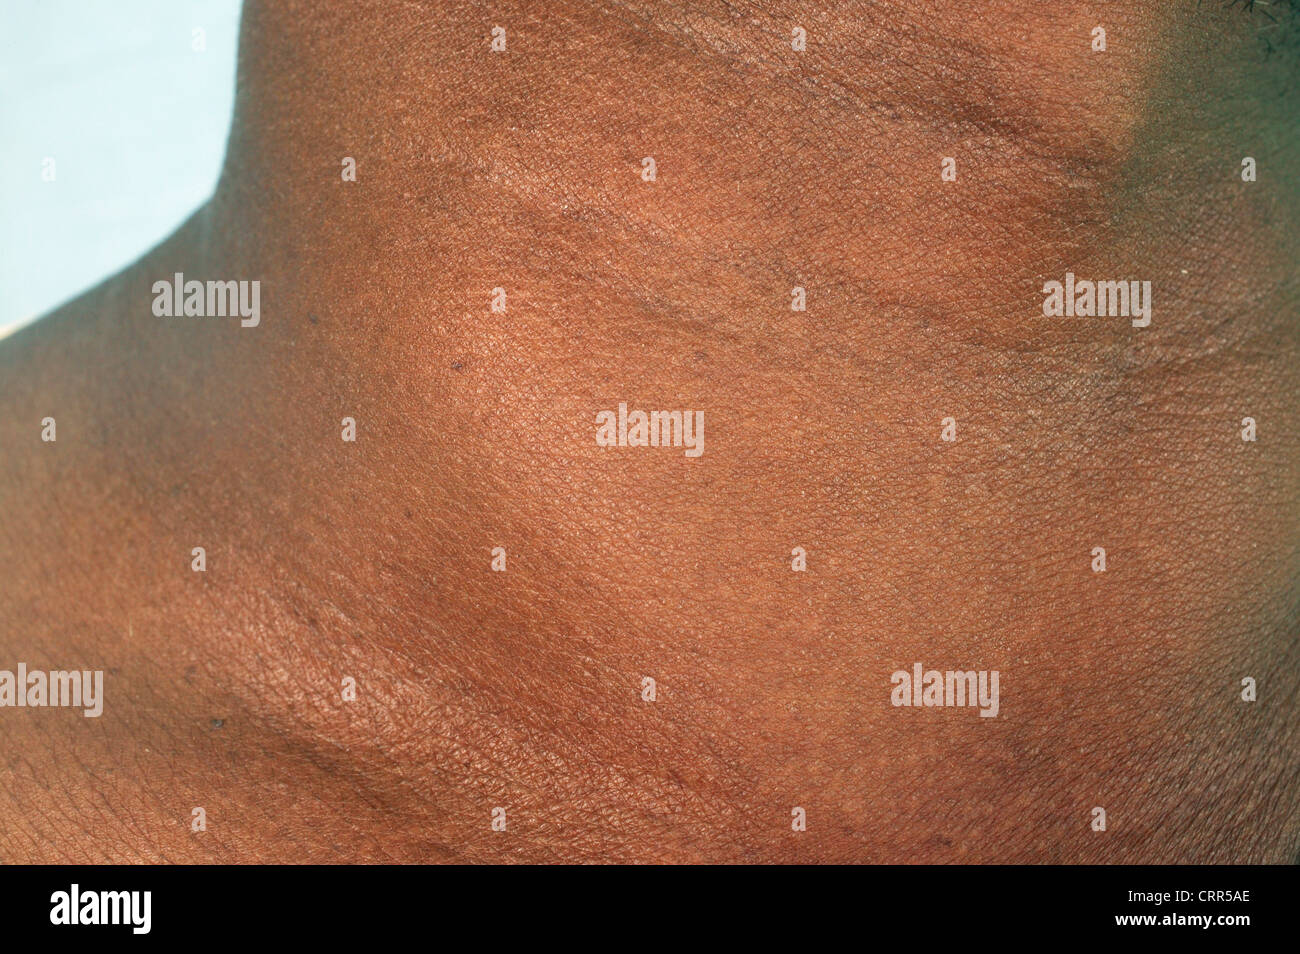 Man with Deficiency Diet and Enlarged Gland Stock Photo